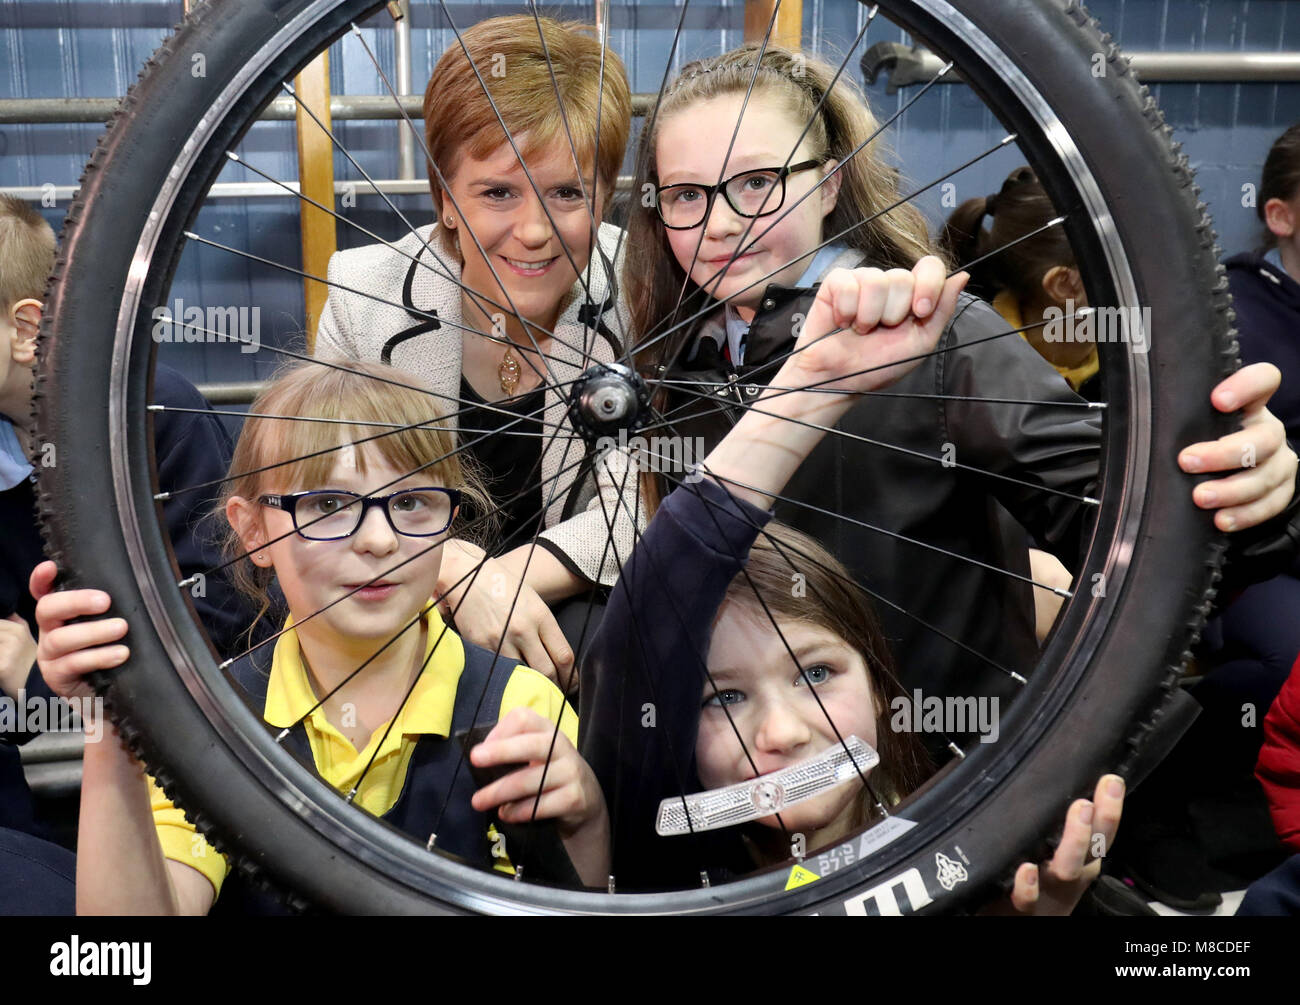 First Minister Nicola Sturgeon takes part in a bikeability repair workshop with pupils Kacey McGairy, 11 (right), Cloe Kerr, 8 (bottom right) and Ailsa Beaton, 8 (bottom left), at Wellshot Primary School in Glasgow as she launches the latest round of Climate Challenge Funding which includes the 1,000th recipient, the Bike for Good project at the school. Stock Photo